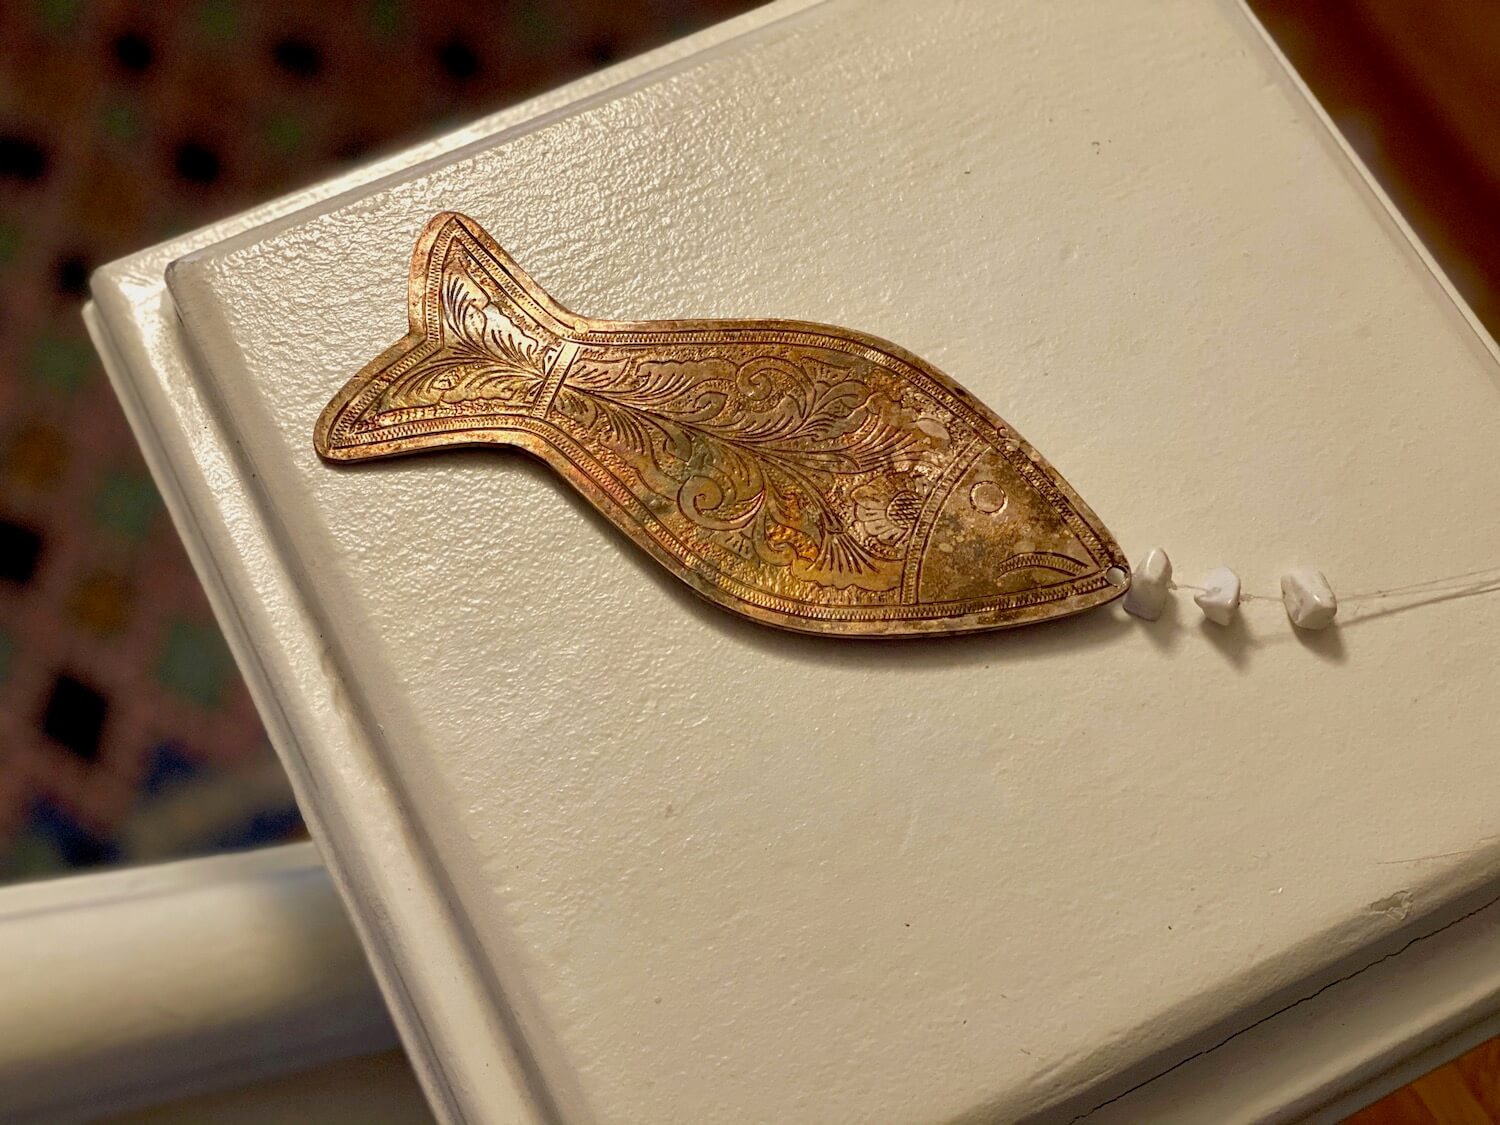 This silver fish is connected to fishing line and three small white stones. It comes from near the ancient site of Dougga near Tunis in Tunisia. In the background on the floor is a hand crafted Tunisia rug with many small diamond shaped figures of different colors.  Truly a souvenir with soul that reminds of great travels.